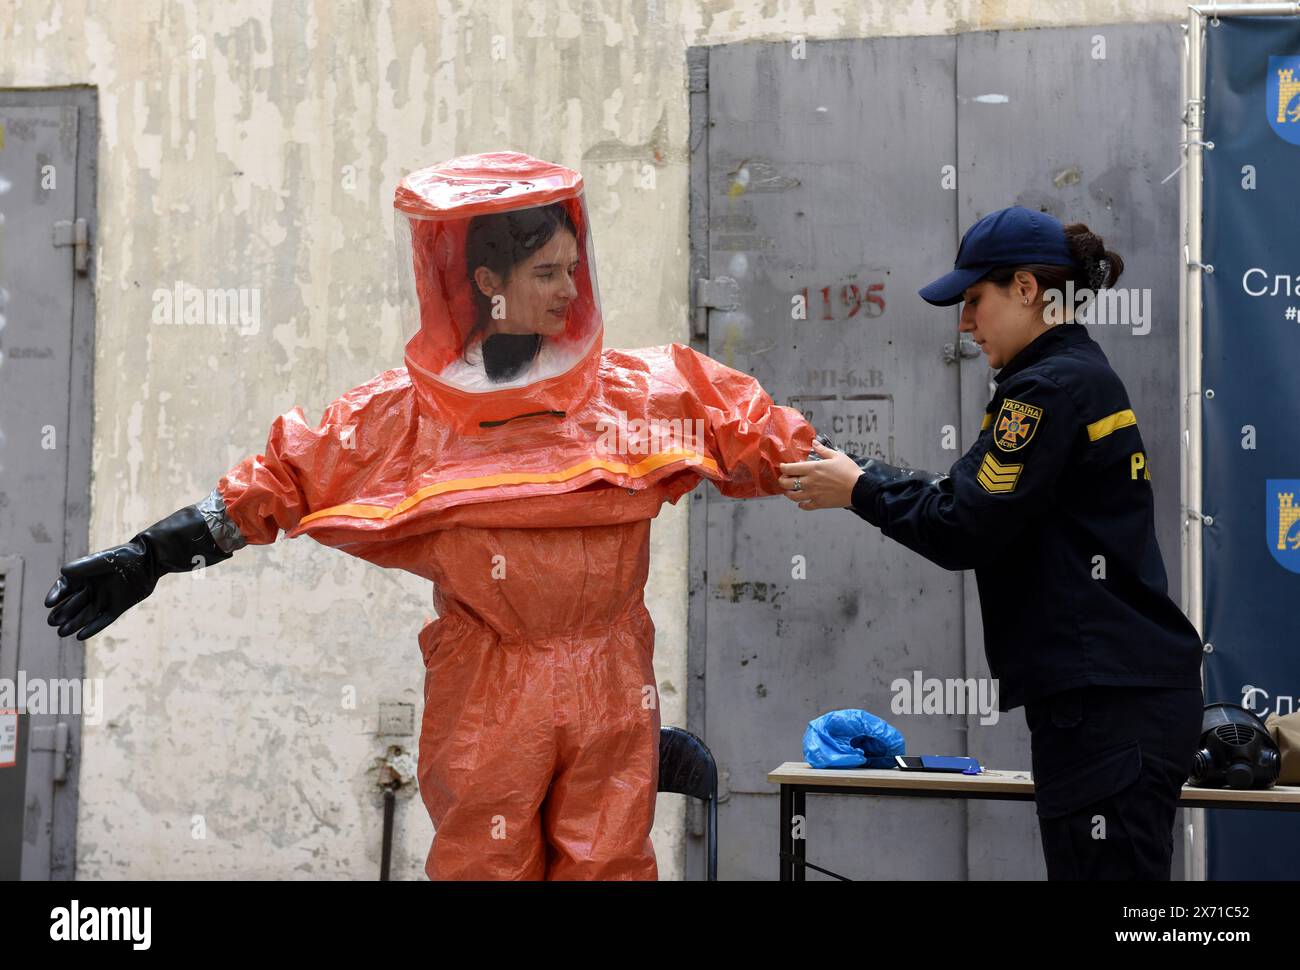 Lviv, Ukraine - September 8, 2022: Training for civilians what to do in a nuclear emergency in Ukraine. Stock Photo